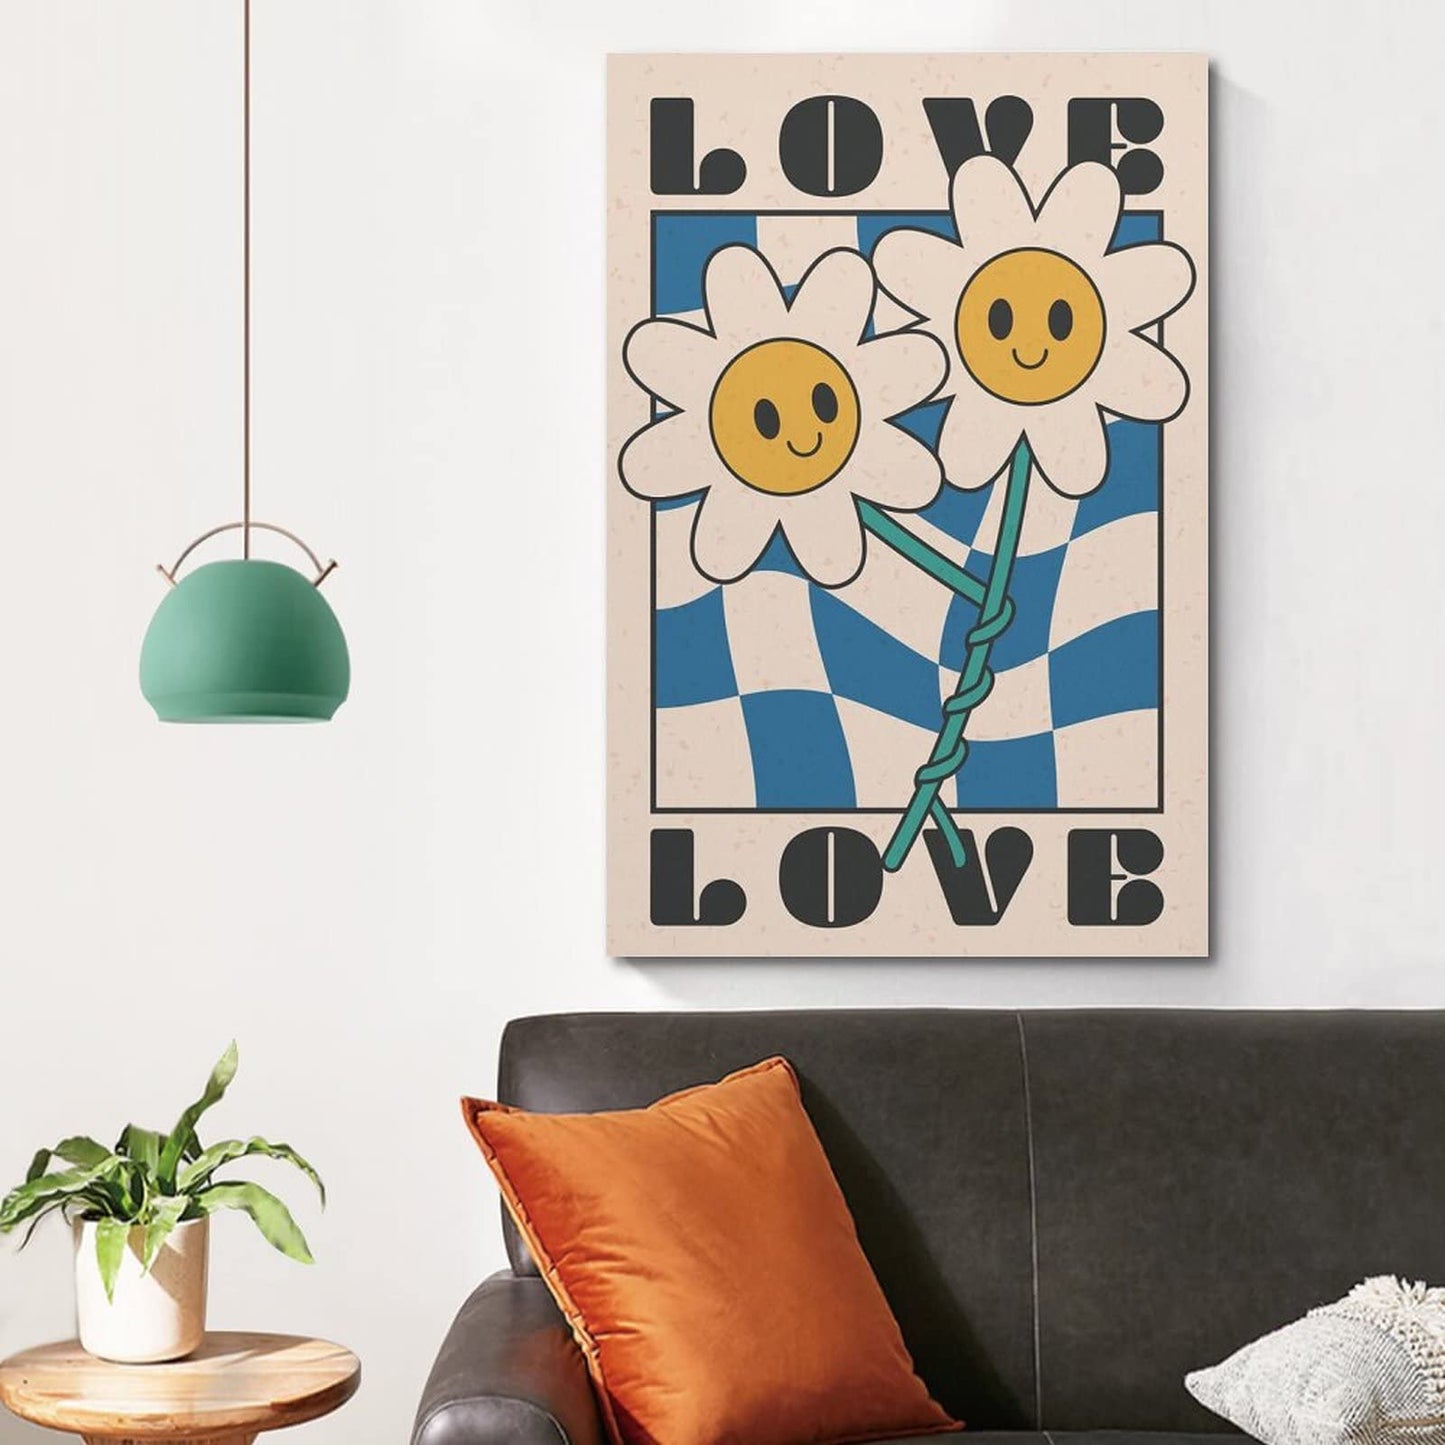 Smile Flower Poster Vintage Posters Retro Aesthetic Room Decor Poster Decorative Painting Canvas Wall Art Living Room Posters Bedroom Painting 12x18inch(30x45cm)